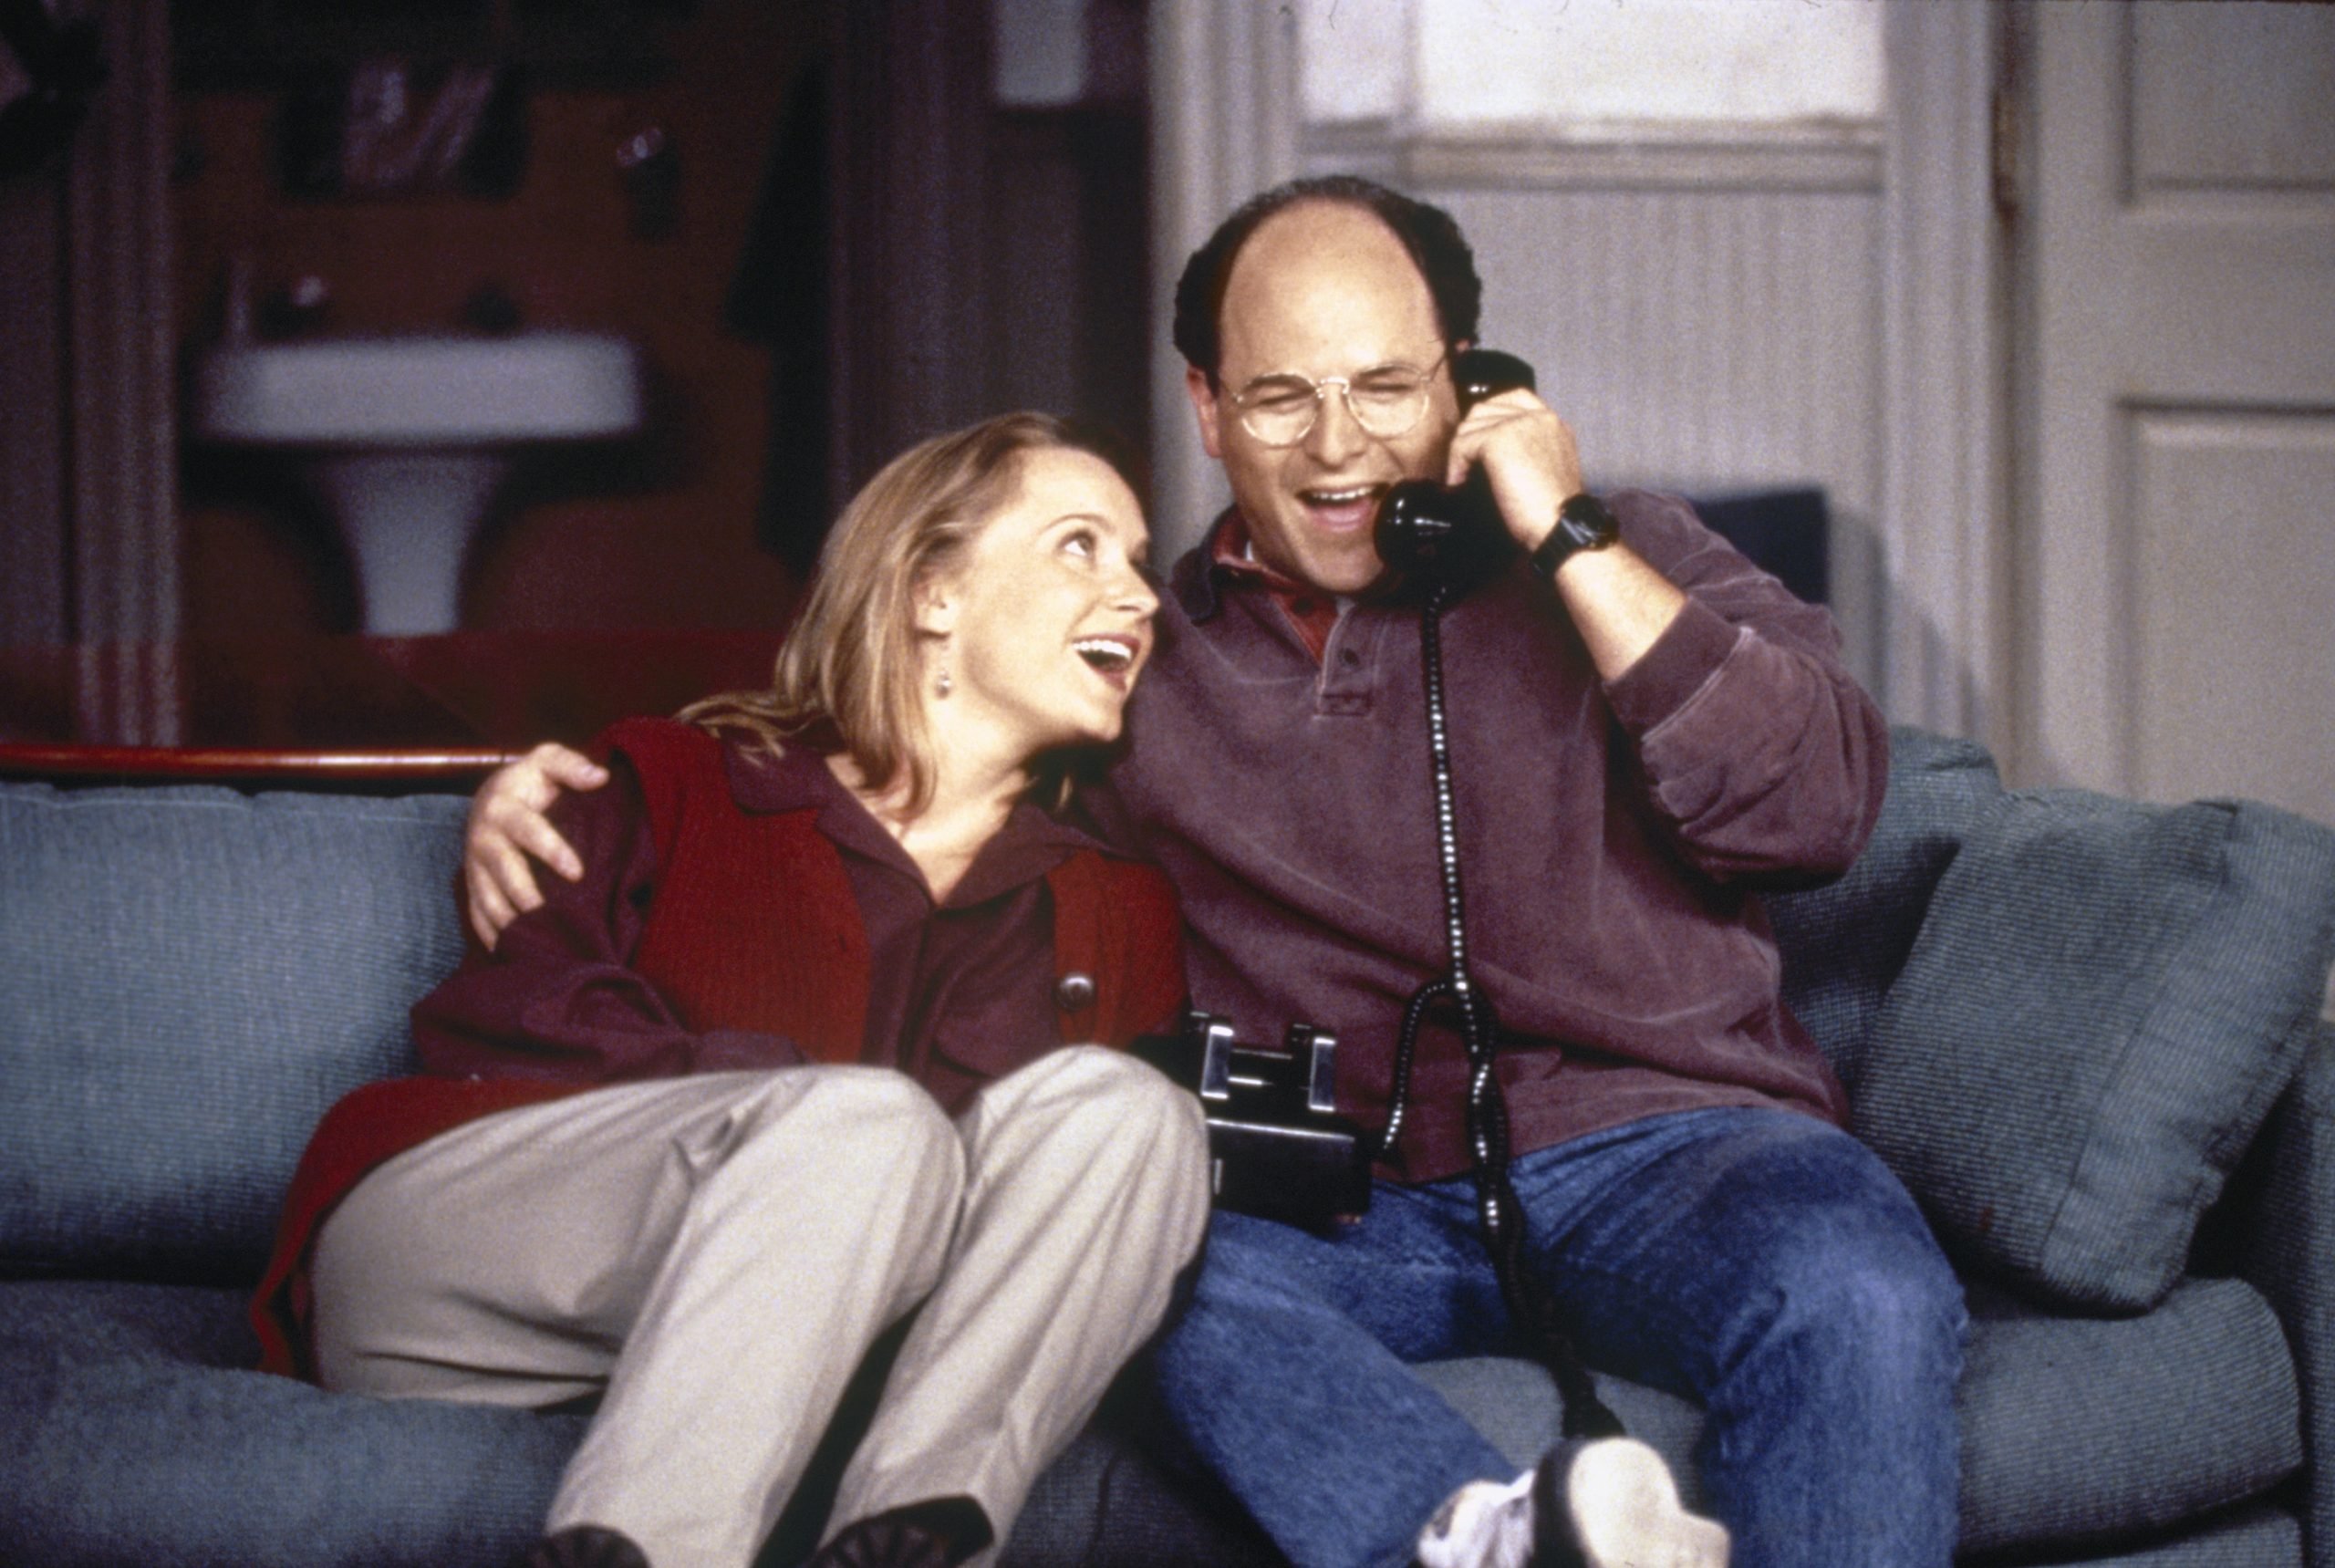 George and Susan on Seinfeld